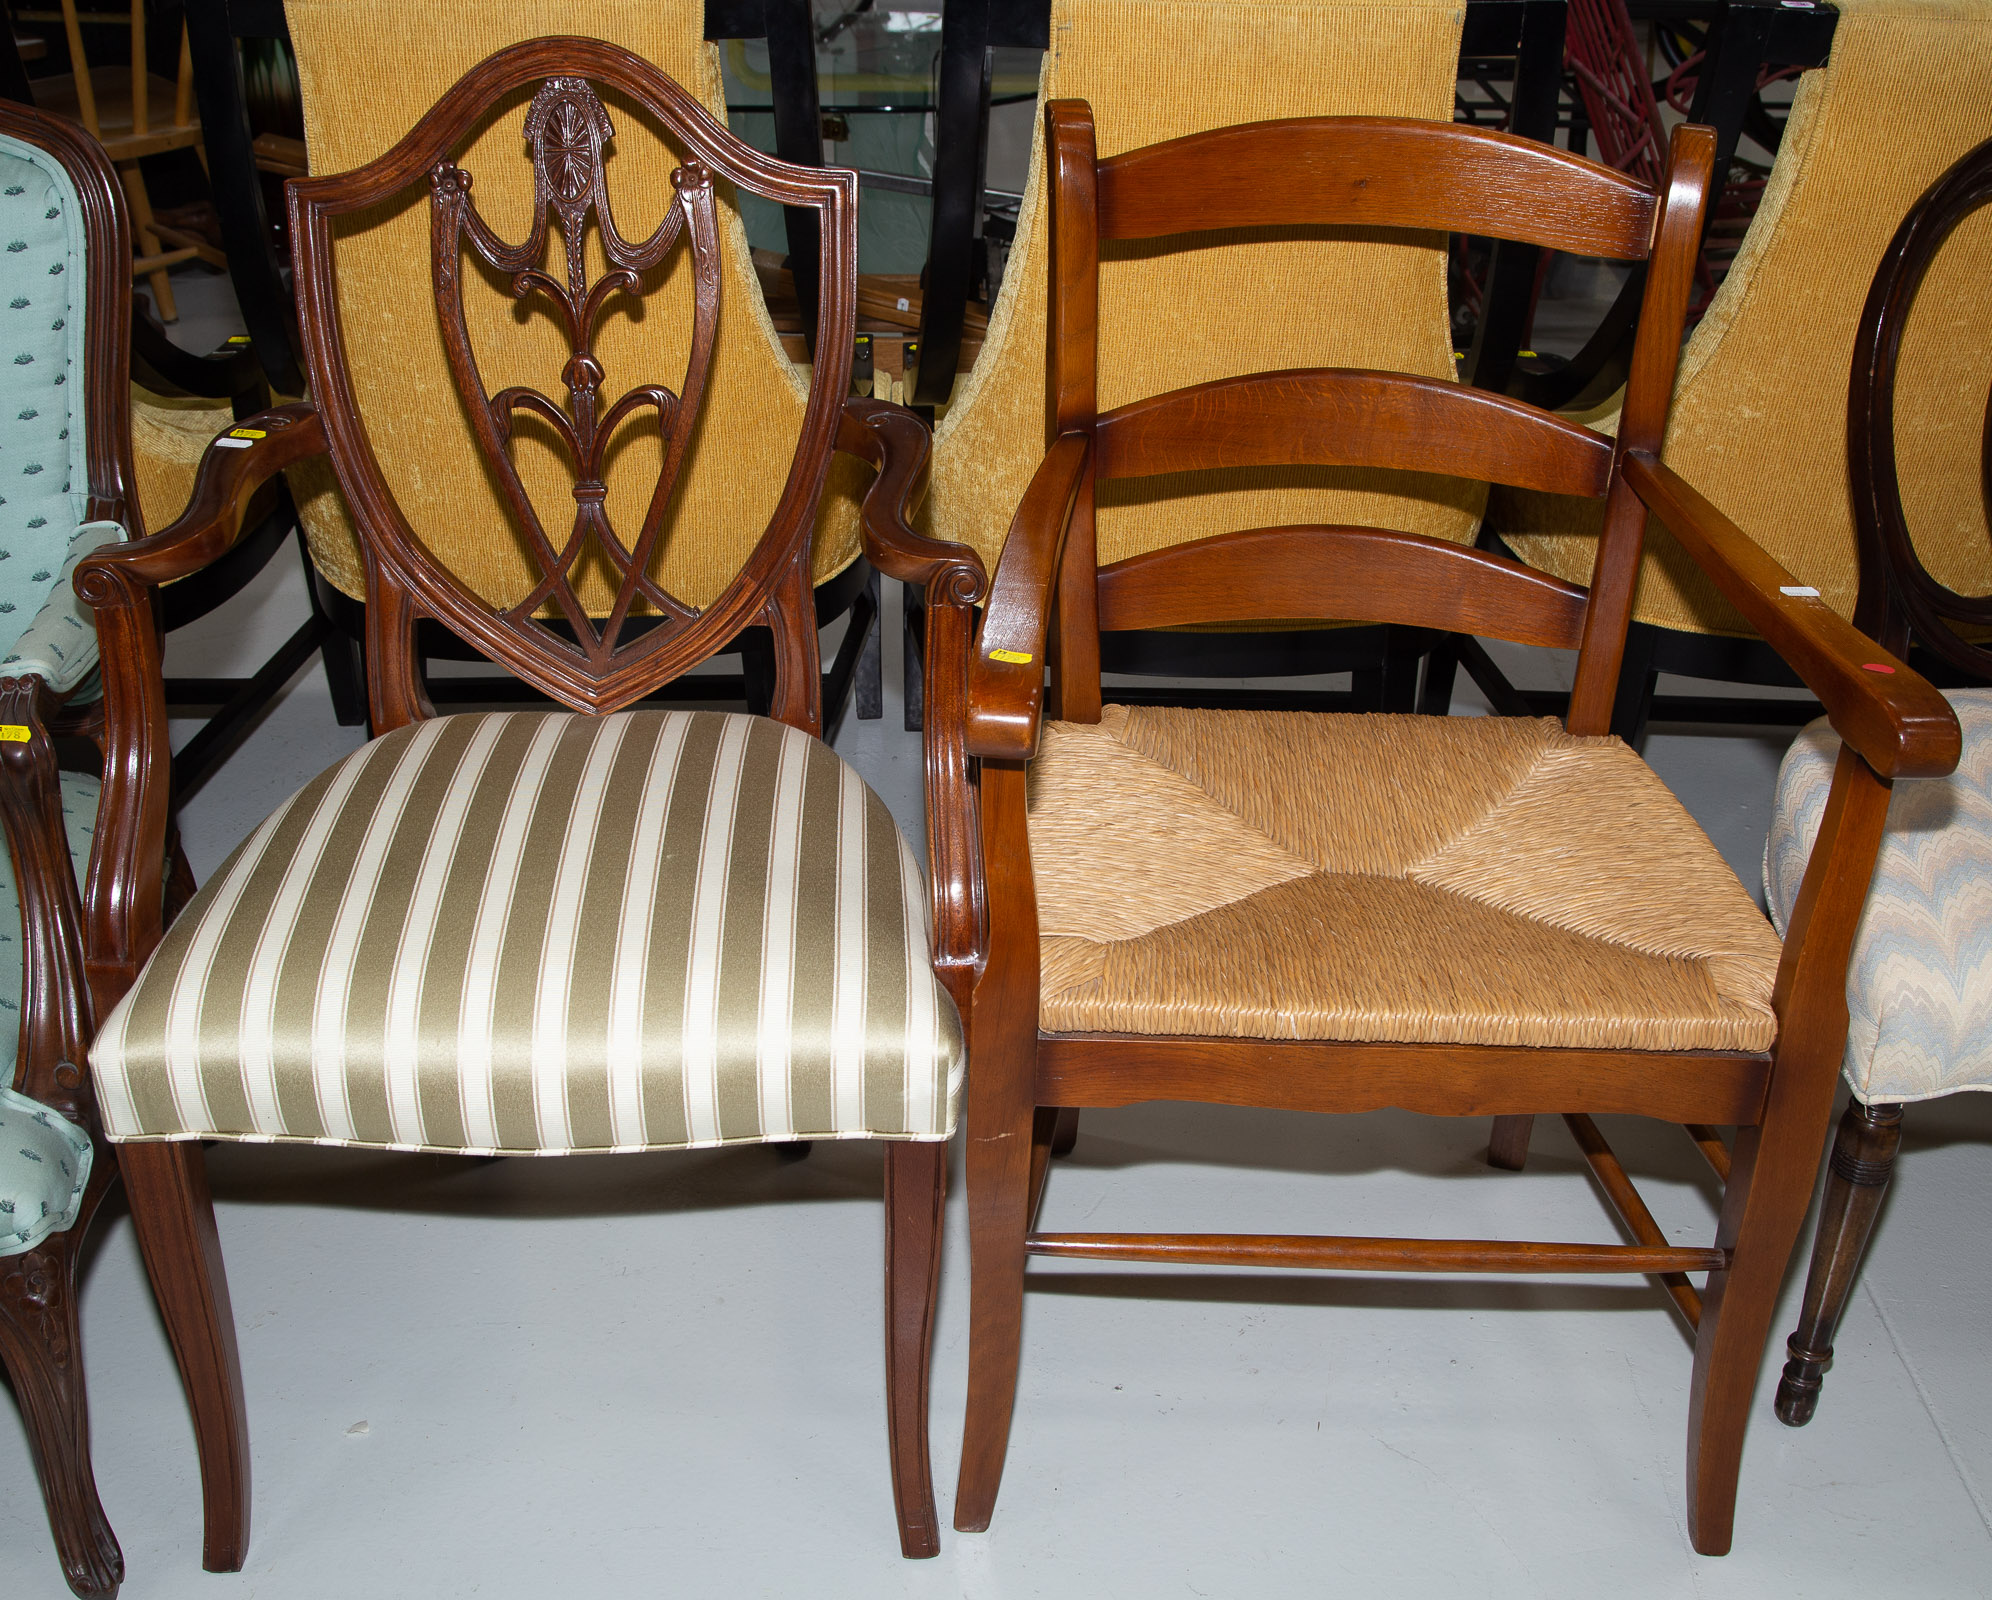 TWO ARM CHAIRS Including a vernacular